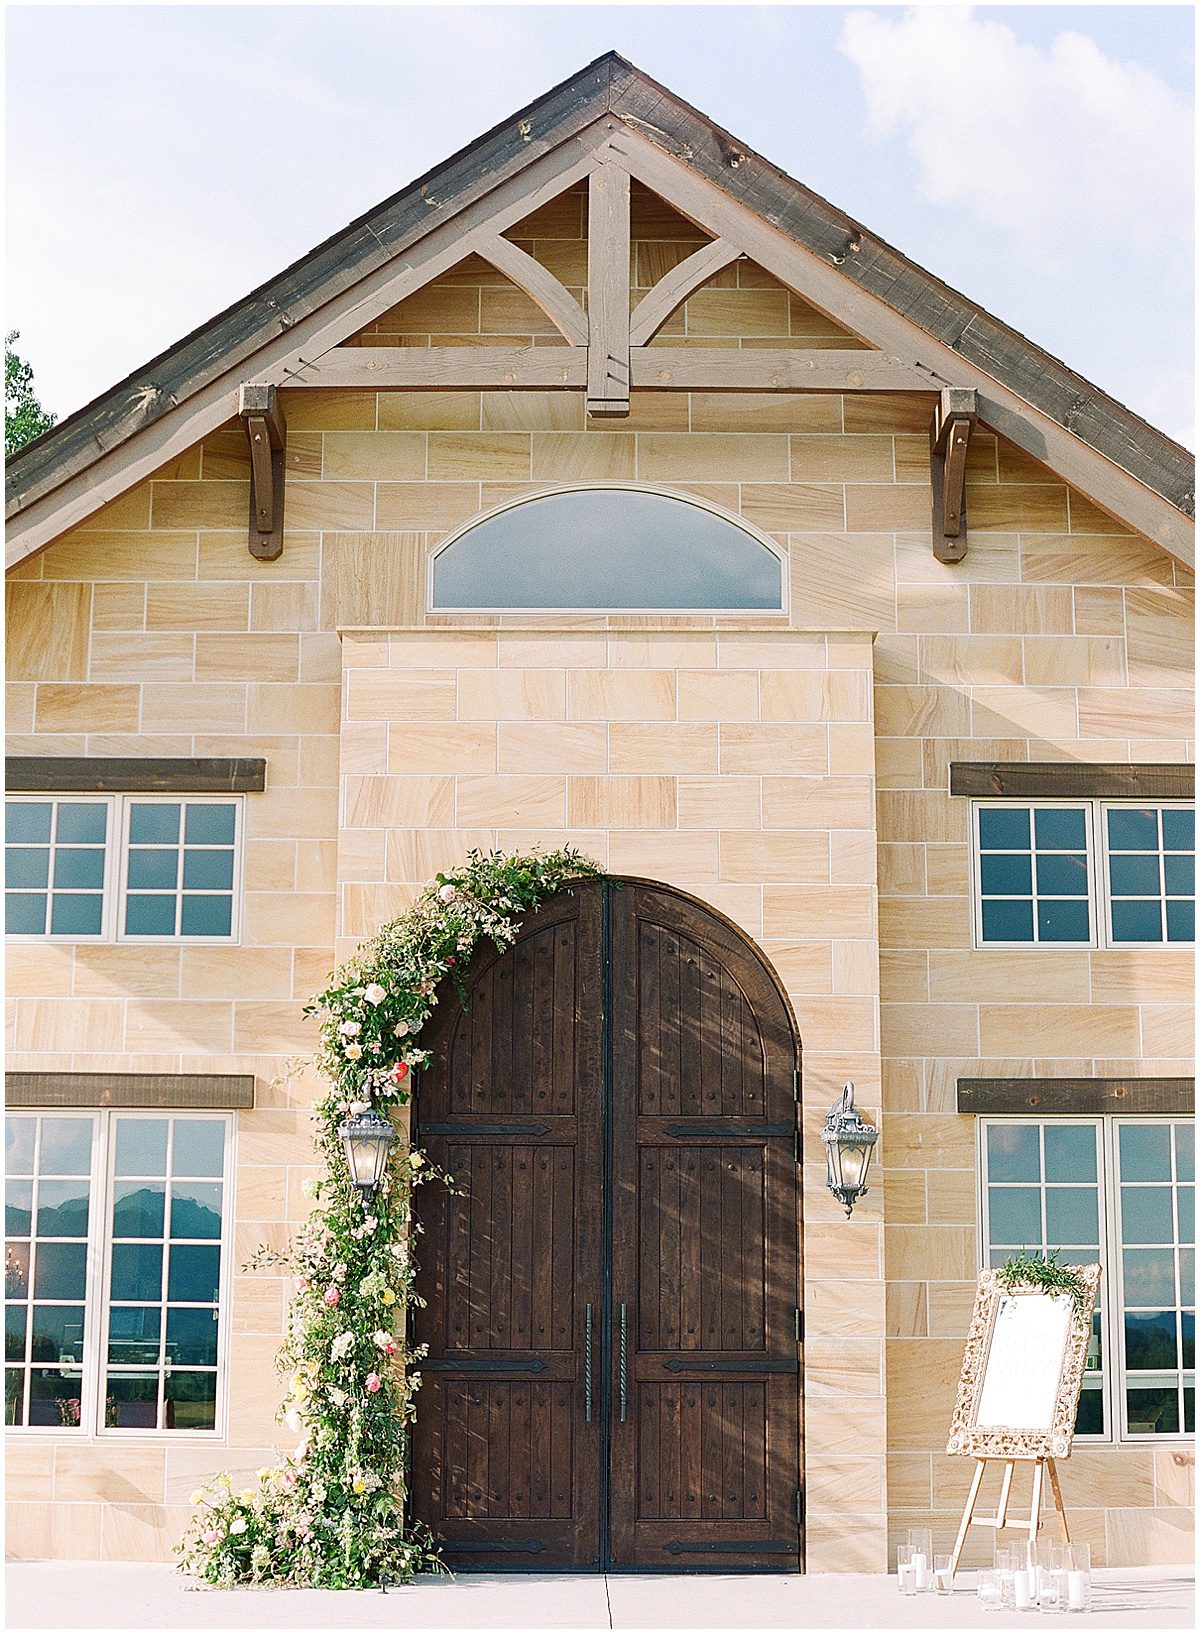 The Ridge Asheville Chateau Doors with Flower Arch Photo